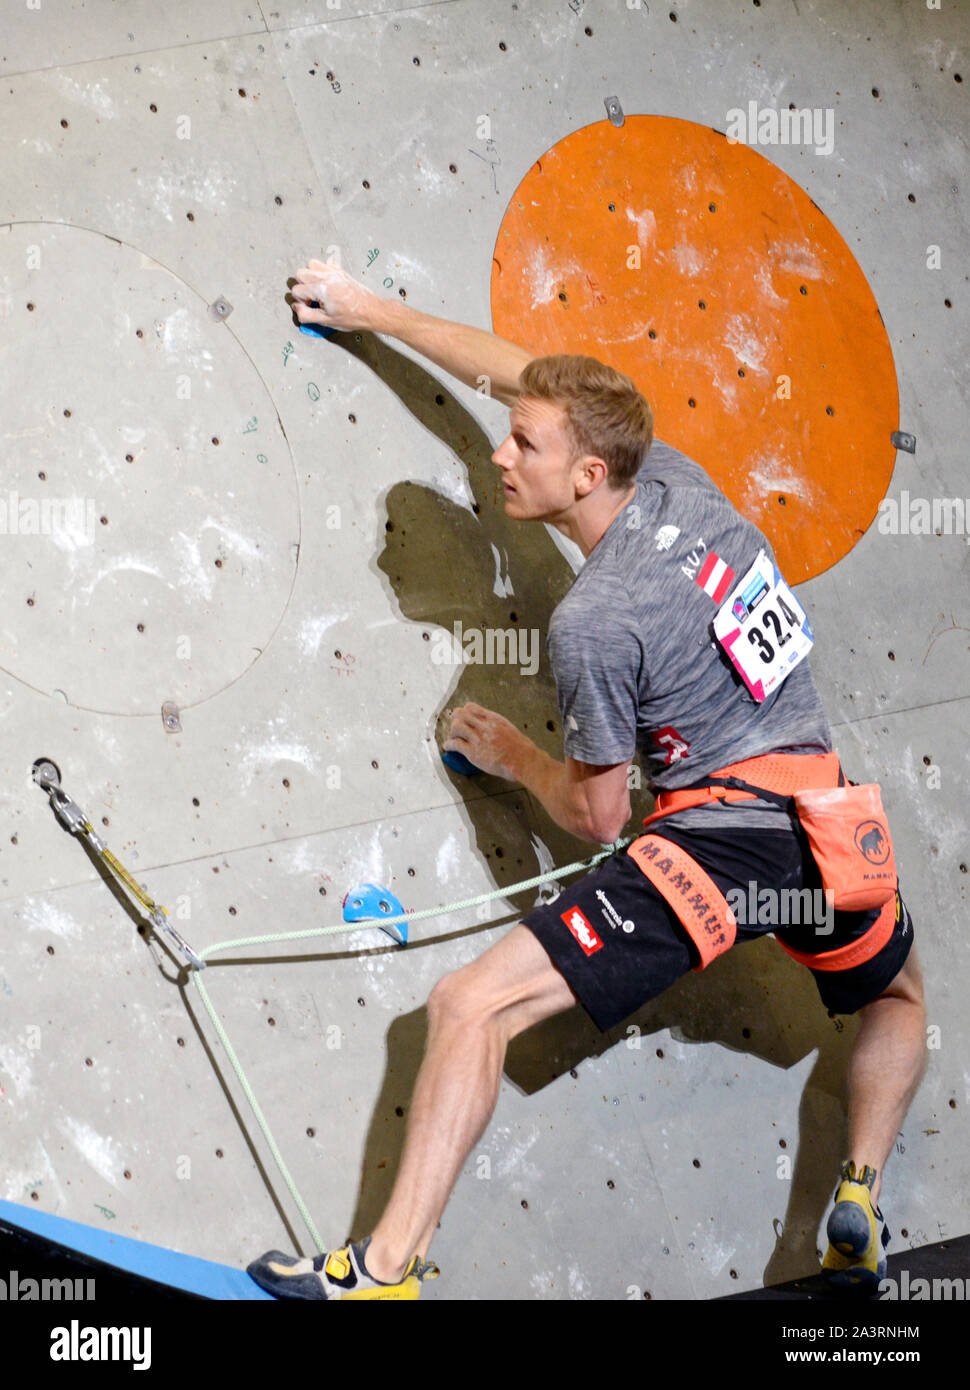 Jakob Schubert of Austria competes in the Lead climbing Mens Final on at the IFSC Climbing World Championships at the Edinburgh International Climbing Stock Photo